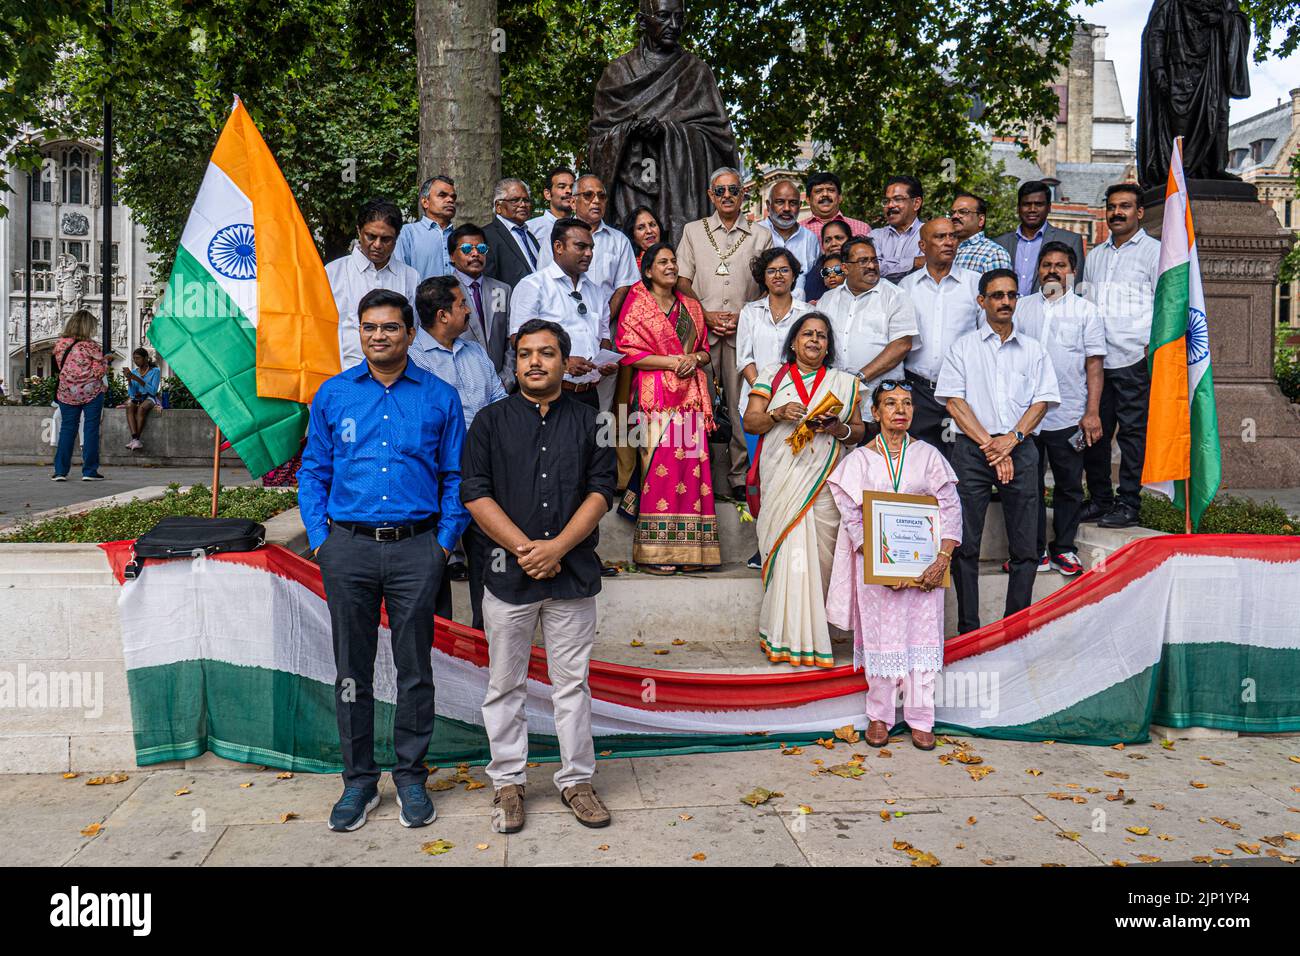 London, UK. 15th Aug, 2022. Members of the British Indian community stand in front the statue of of Mahatma Gandhi i in Parliament Square to celebrate the 75th Anniversary of Independence of India on 15 August 1947  from the British Raj. Credit. Credit: amer ghazzal/Alamy Live News Stock Photo